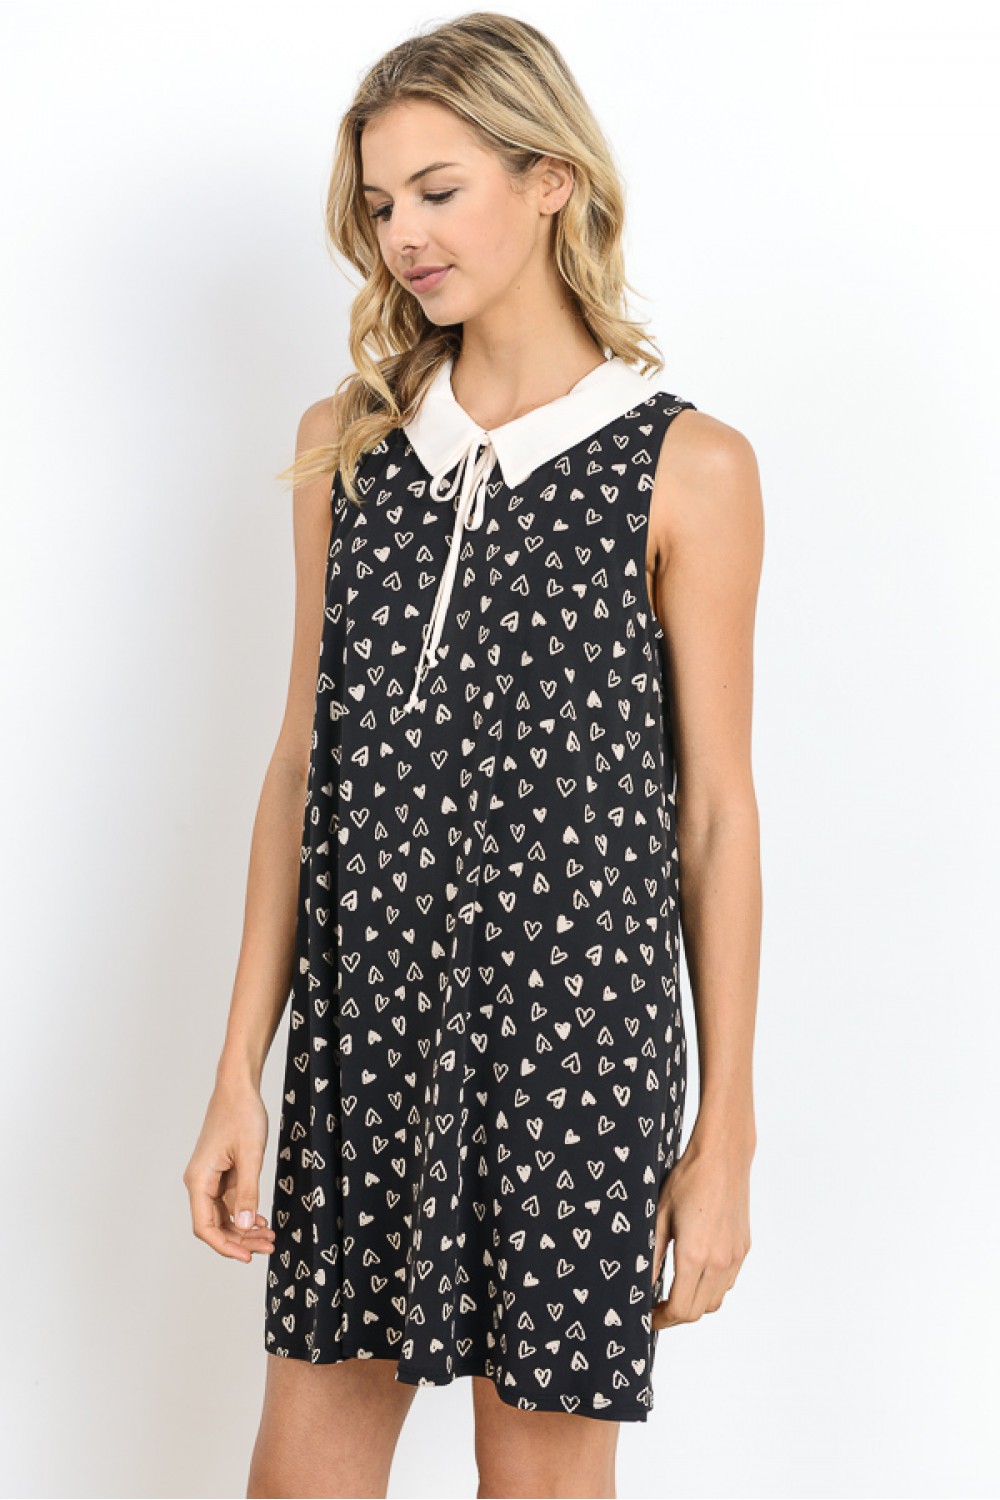 Tie Neck  Collar  Heart Dress  Clearance Lazy Caturday 